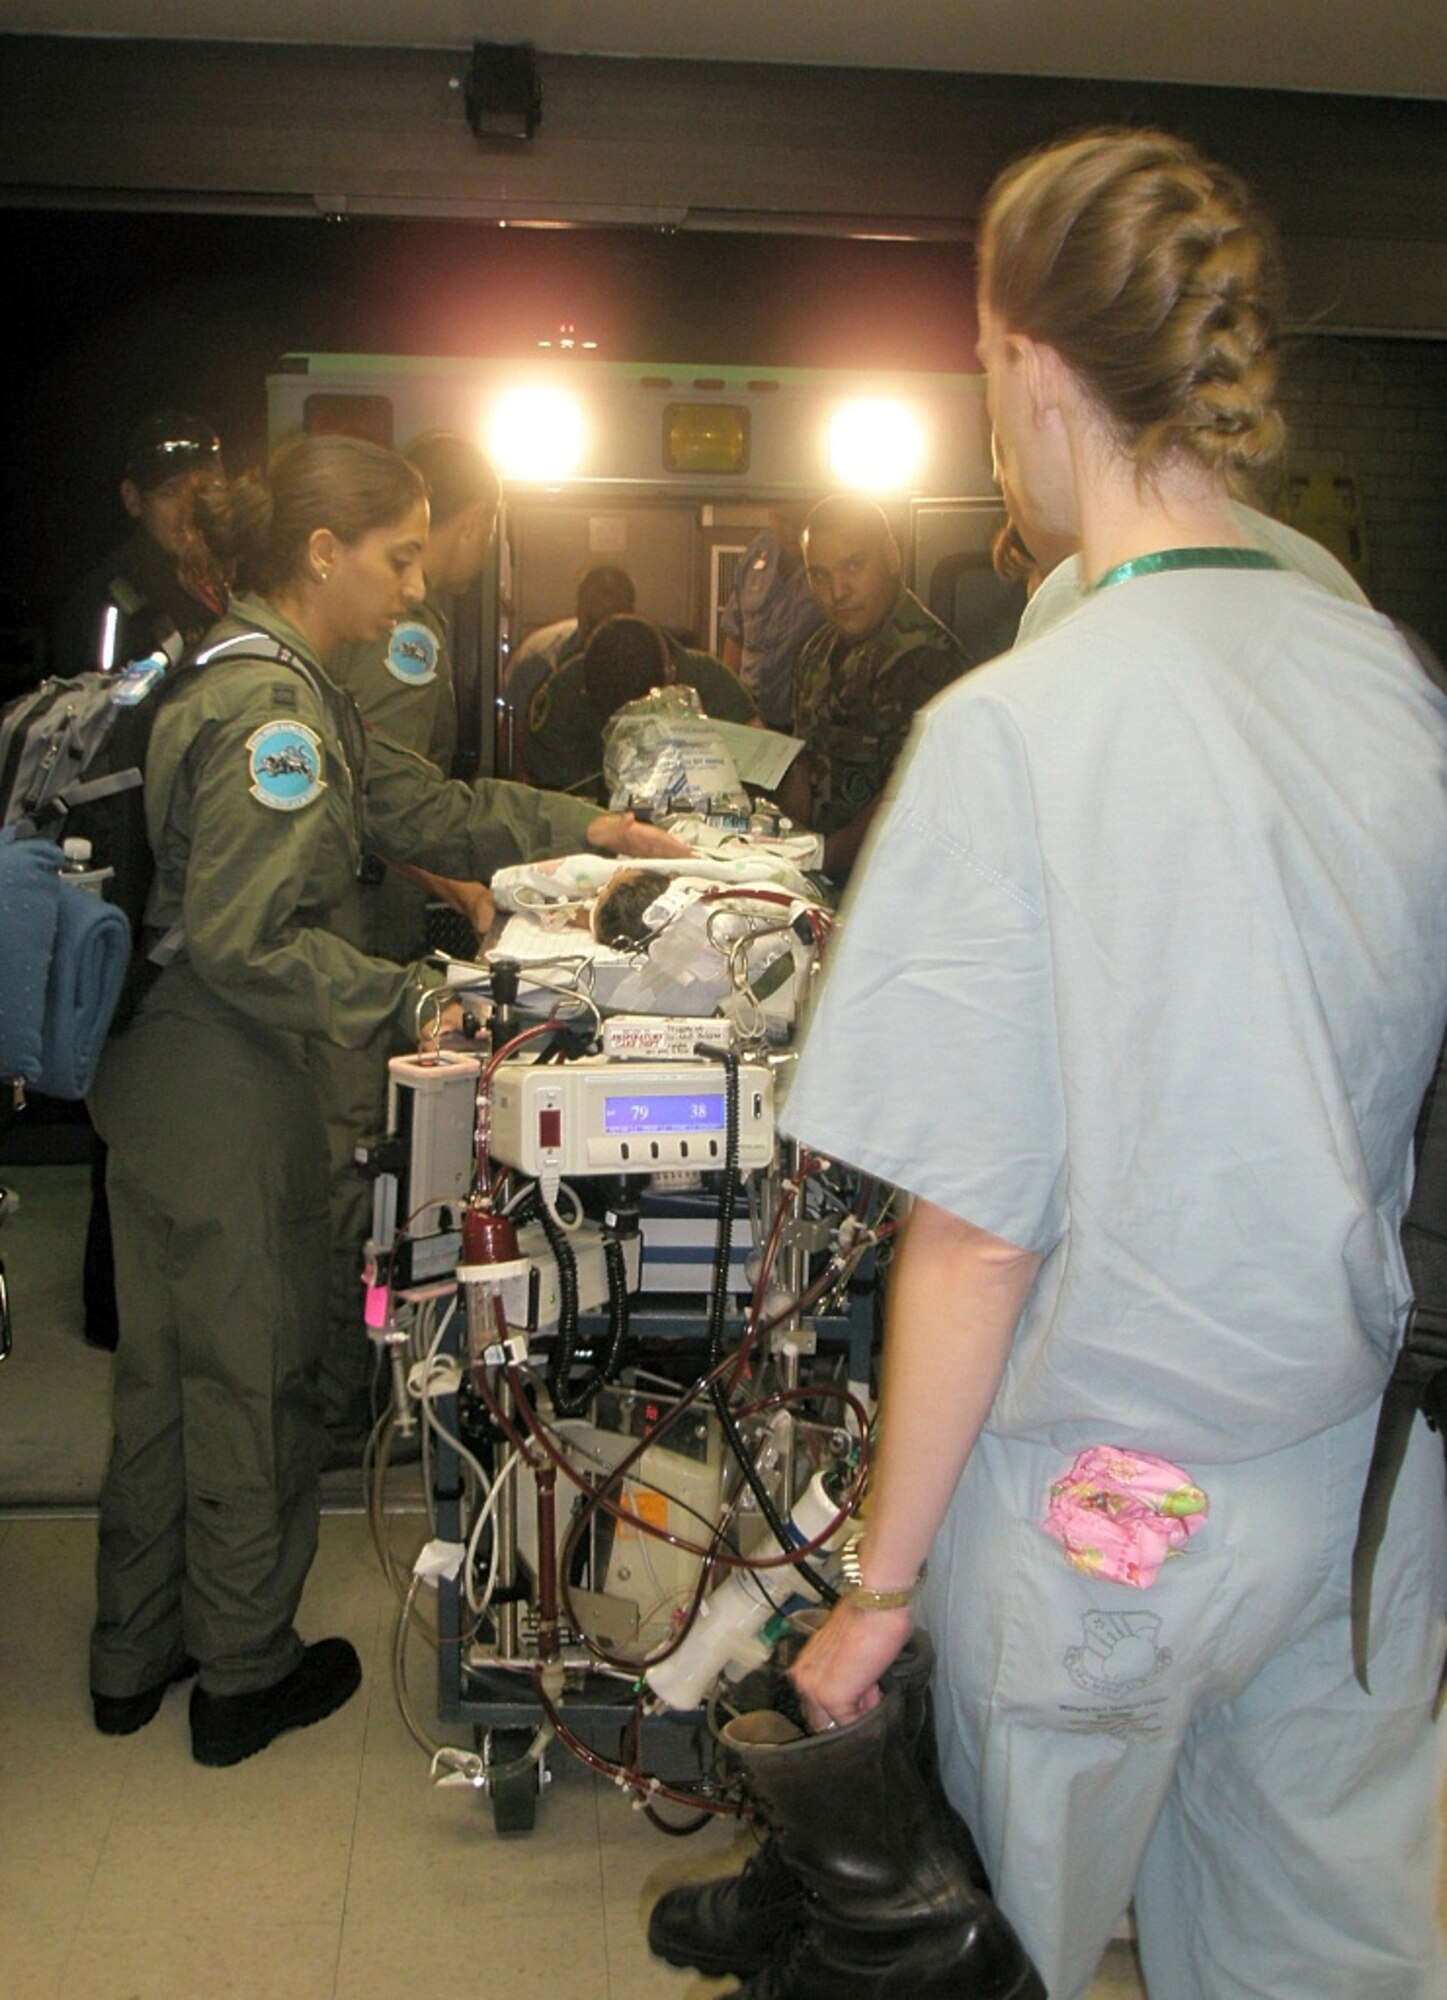 The 59th Medical Wing Critical Care Air Transport Team transport an infant from a Corpus Christi, Texas hospital to Wilford Hall Medical Center Sep. 9. The baby was moved to WHMC in anticipation of Hurricane Ike hitting the Texas coastline.  Alannah Miranda Garcia remains on extracorporeal membrane oxygenation, a heart-lung bypass machine in the WHMC neonatal intensive care unit. (U.S. Air Force photo/Col. (Dr.) Robert Digeronimo)   